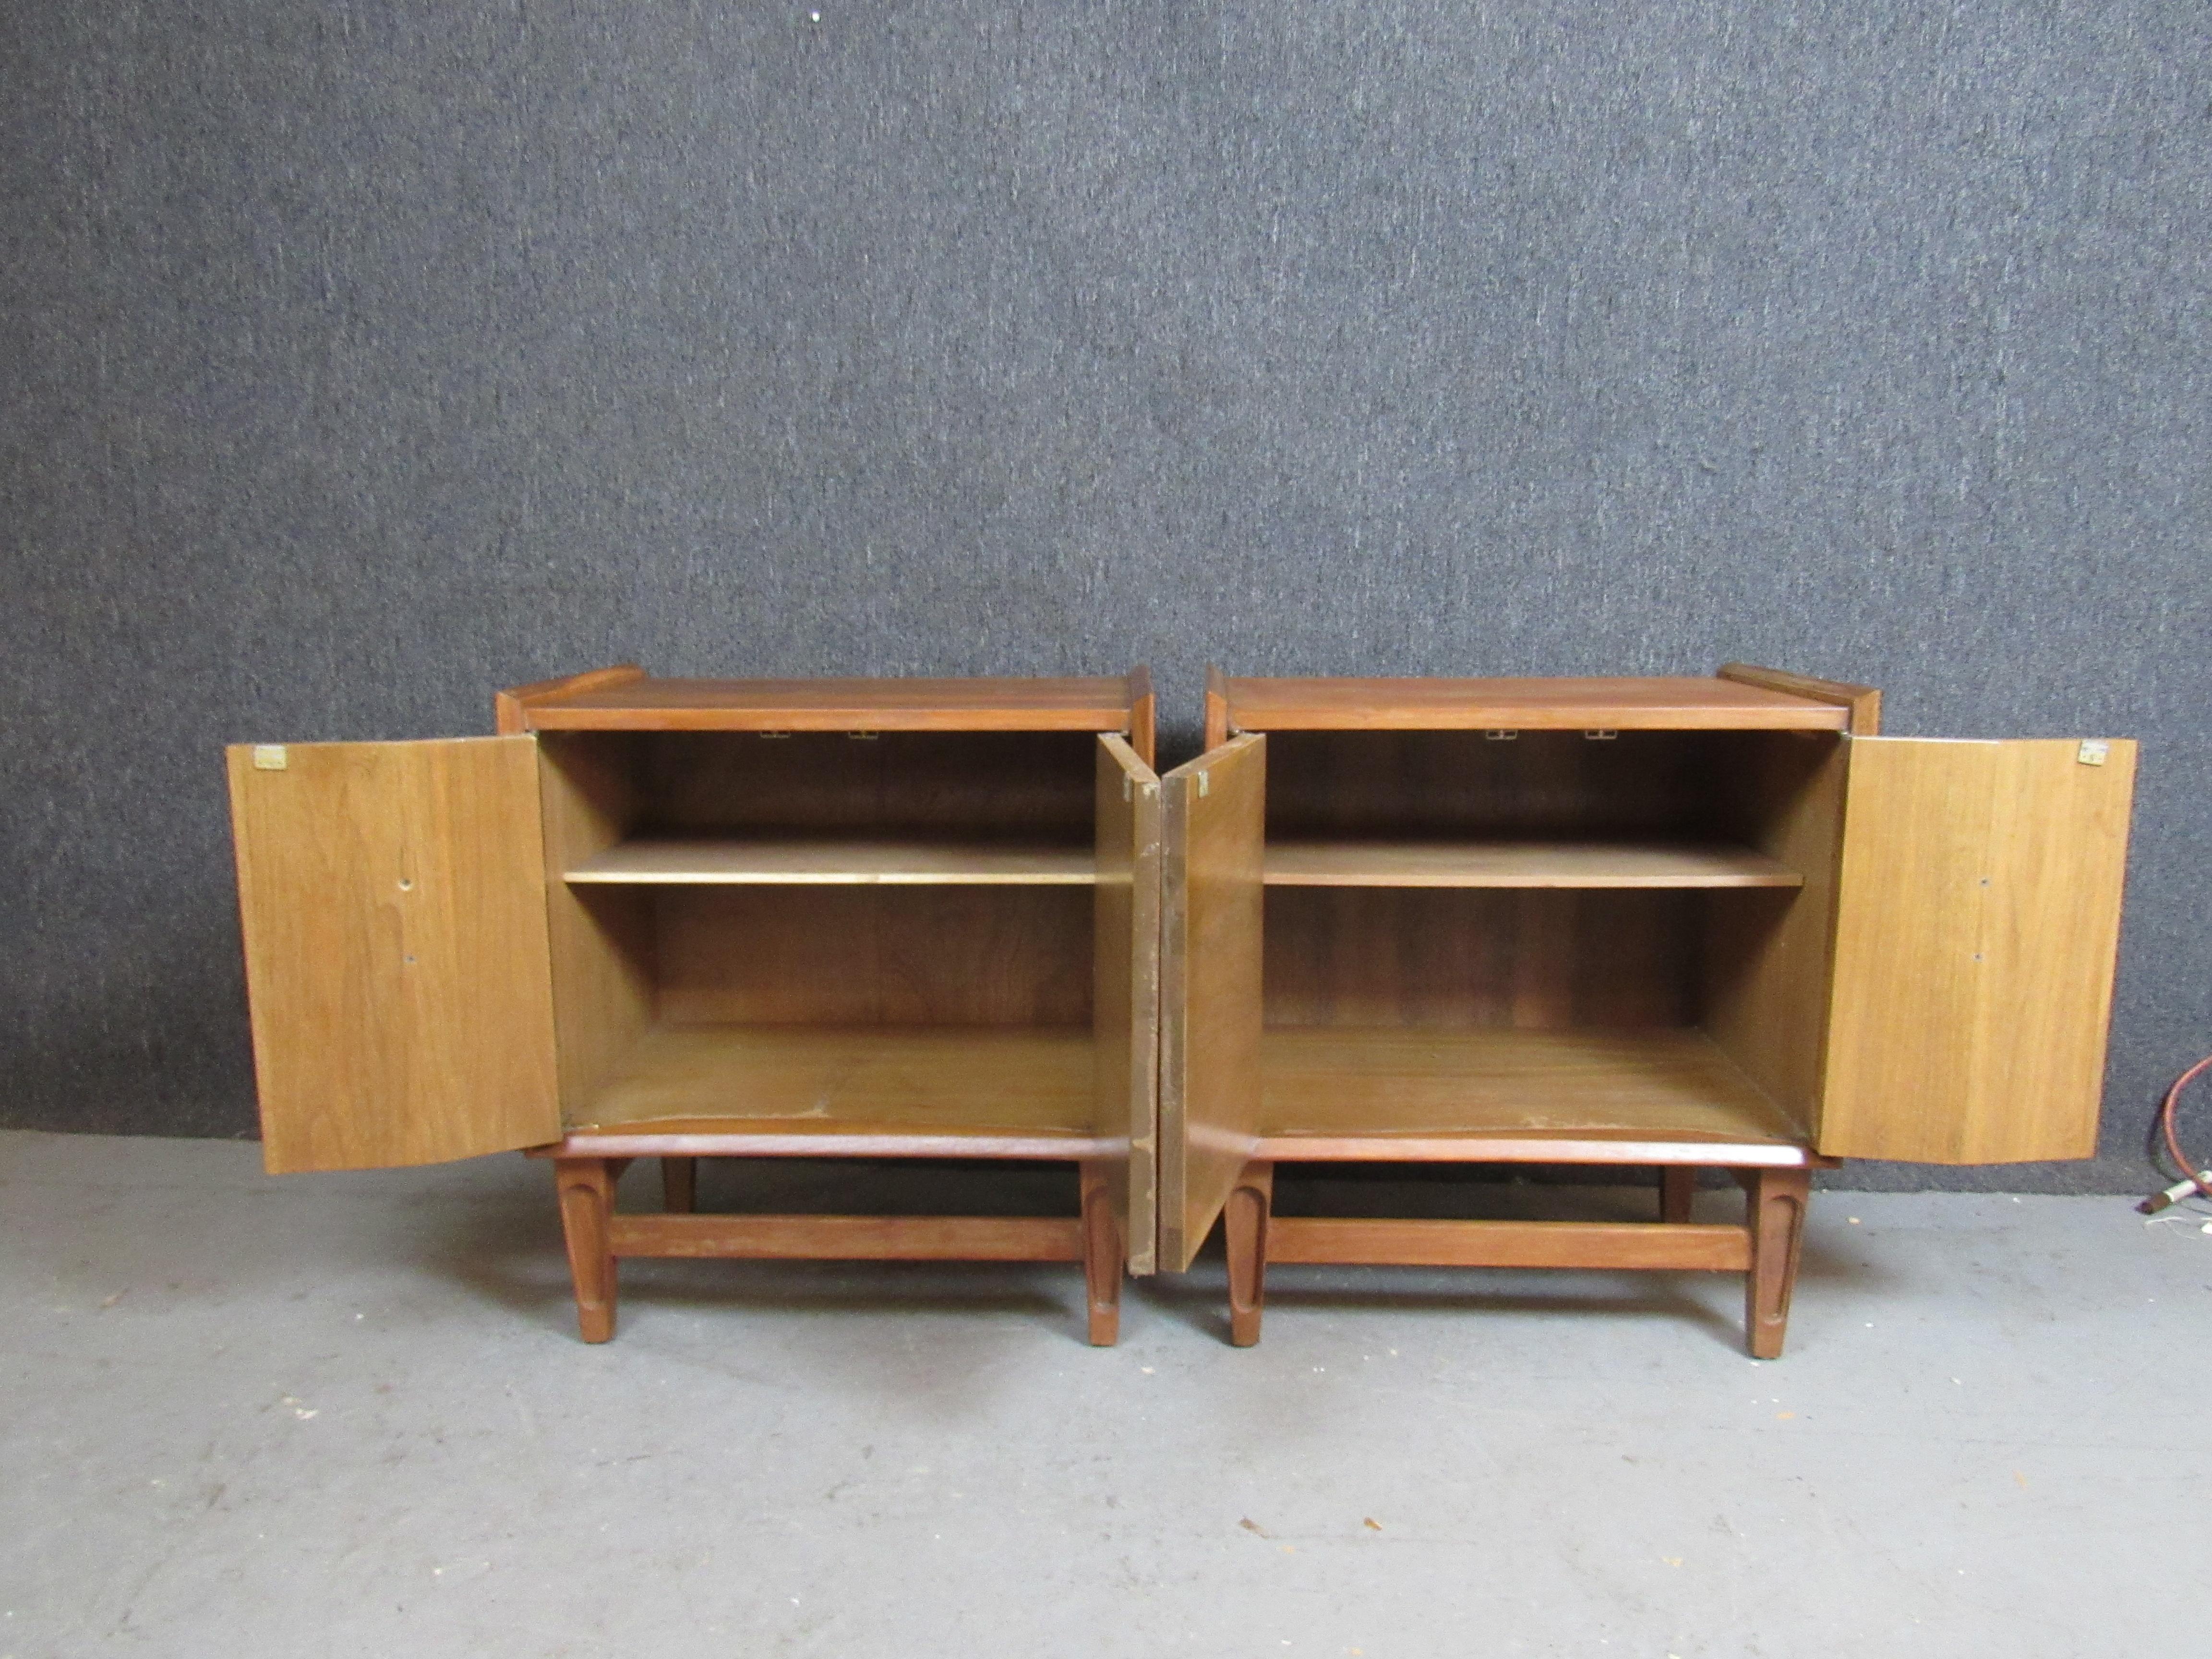 Pair of mid-century modern nightstands by Karlit of Sweden. Features dramatic sculpted handles on each door, tapered legs, and open cabinet space with shelves.
Please confirm location NY or NJ